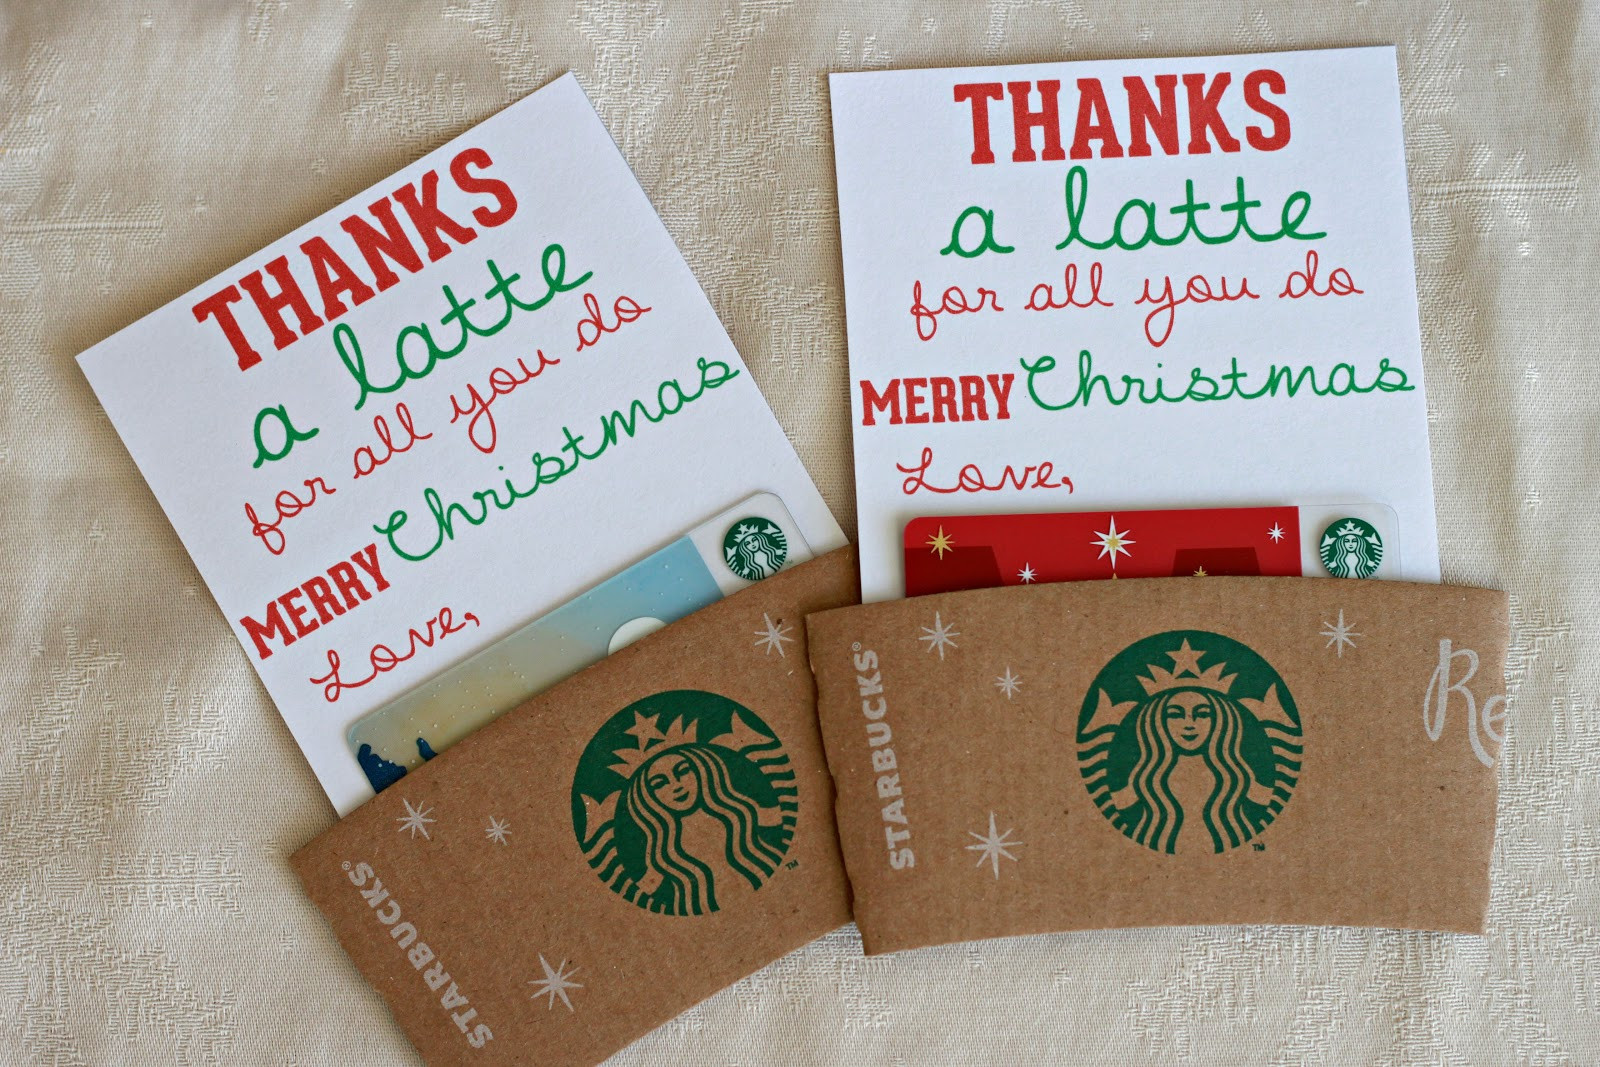 DIY Gifts For Christmas
 Man Starkey thanks a latte